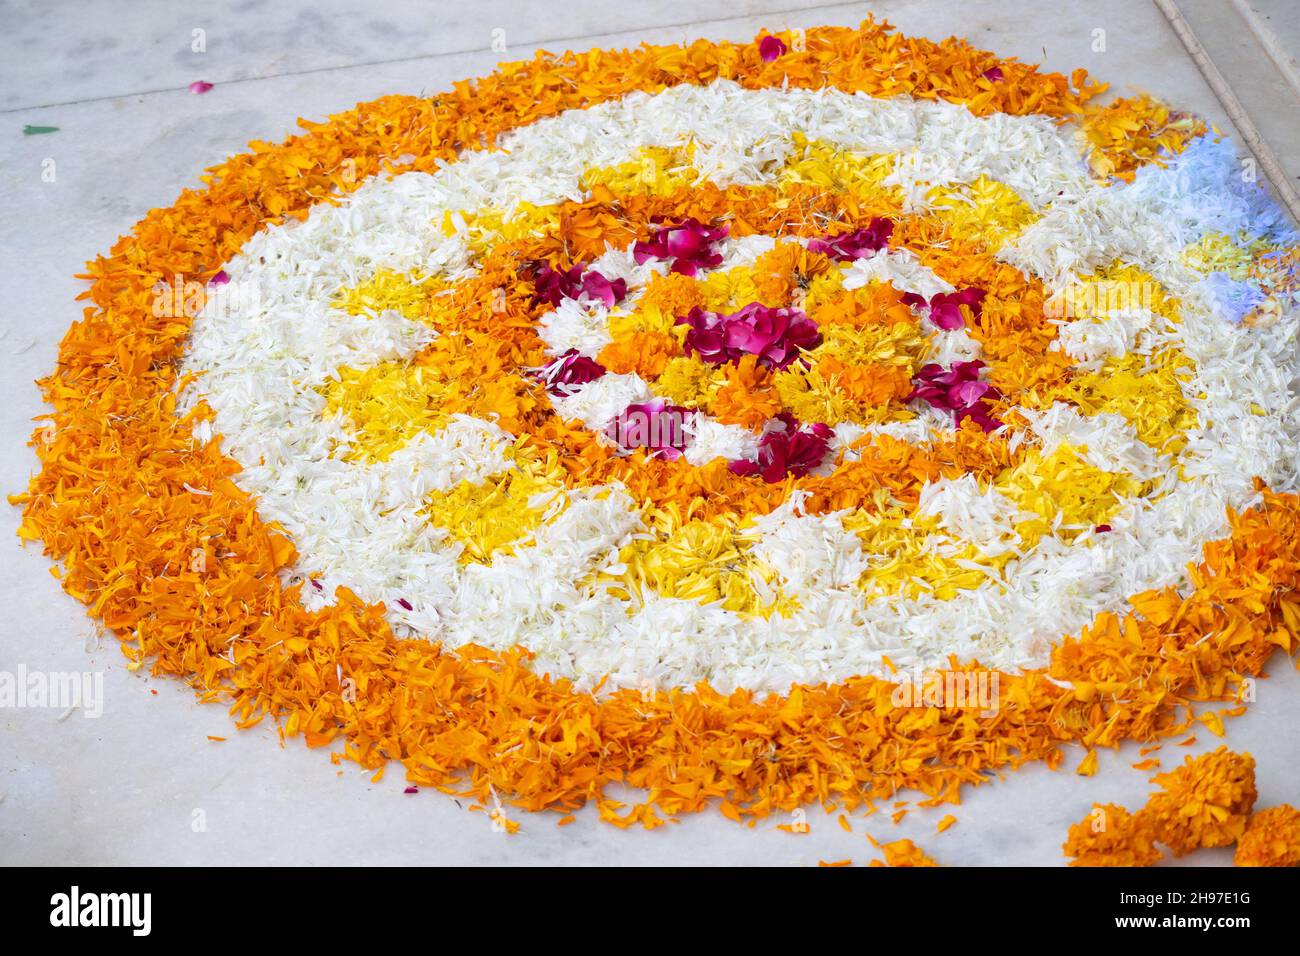 Rangoli pookalam pattern made of flower petals on teh ground for religious celebrations like diwali, christmas and new year Stock Photo